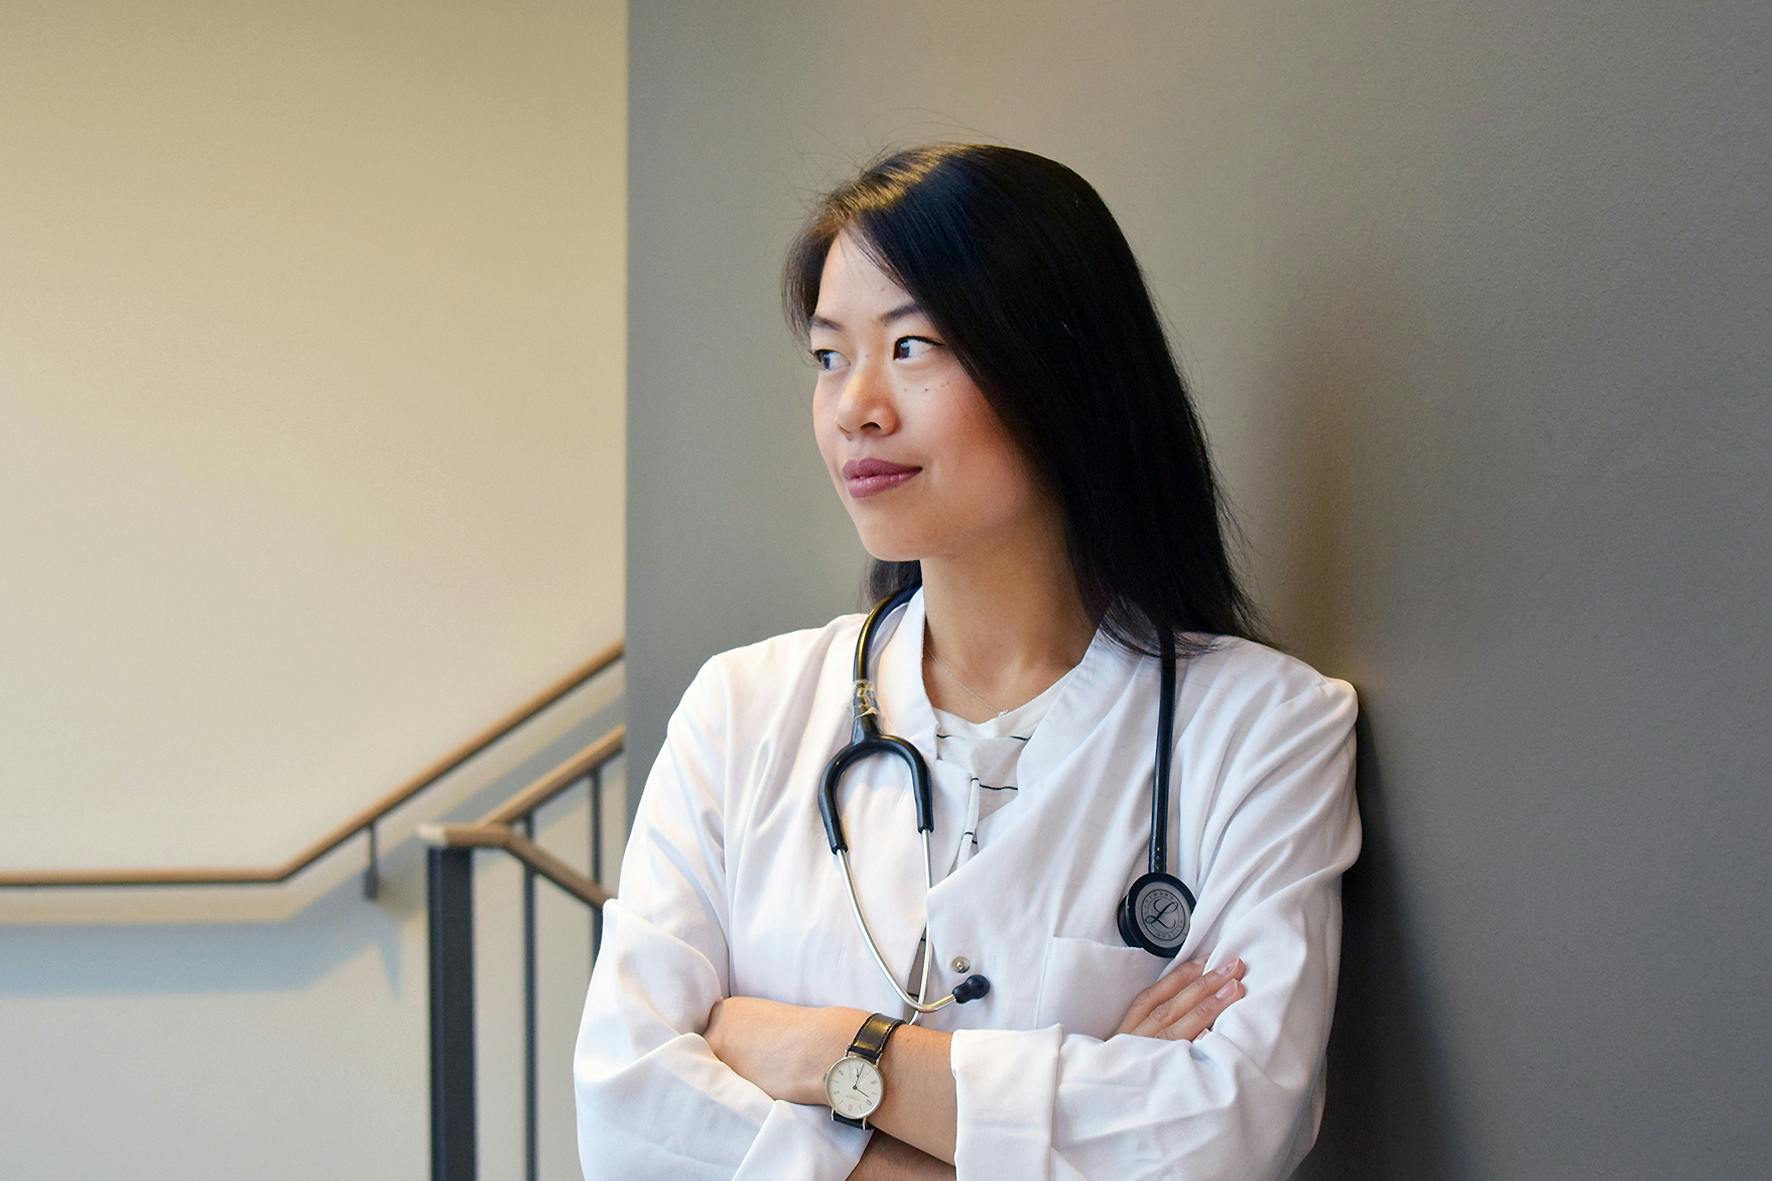 Dr Sophie Chung